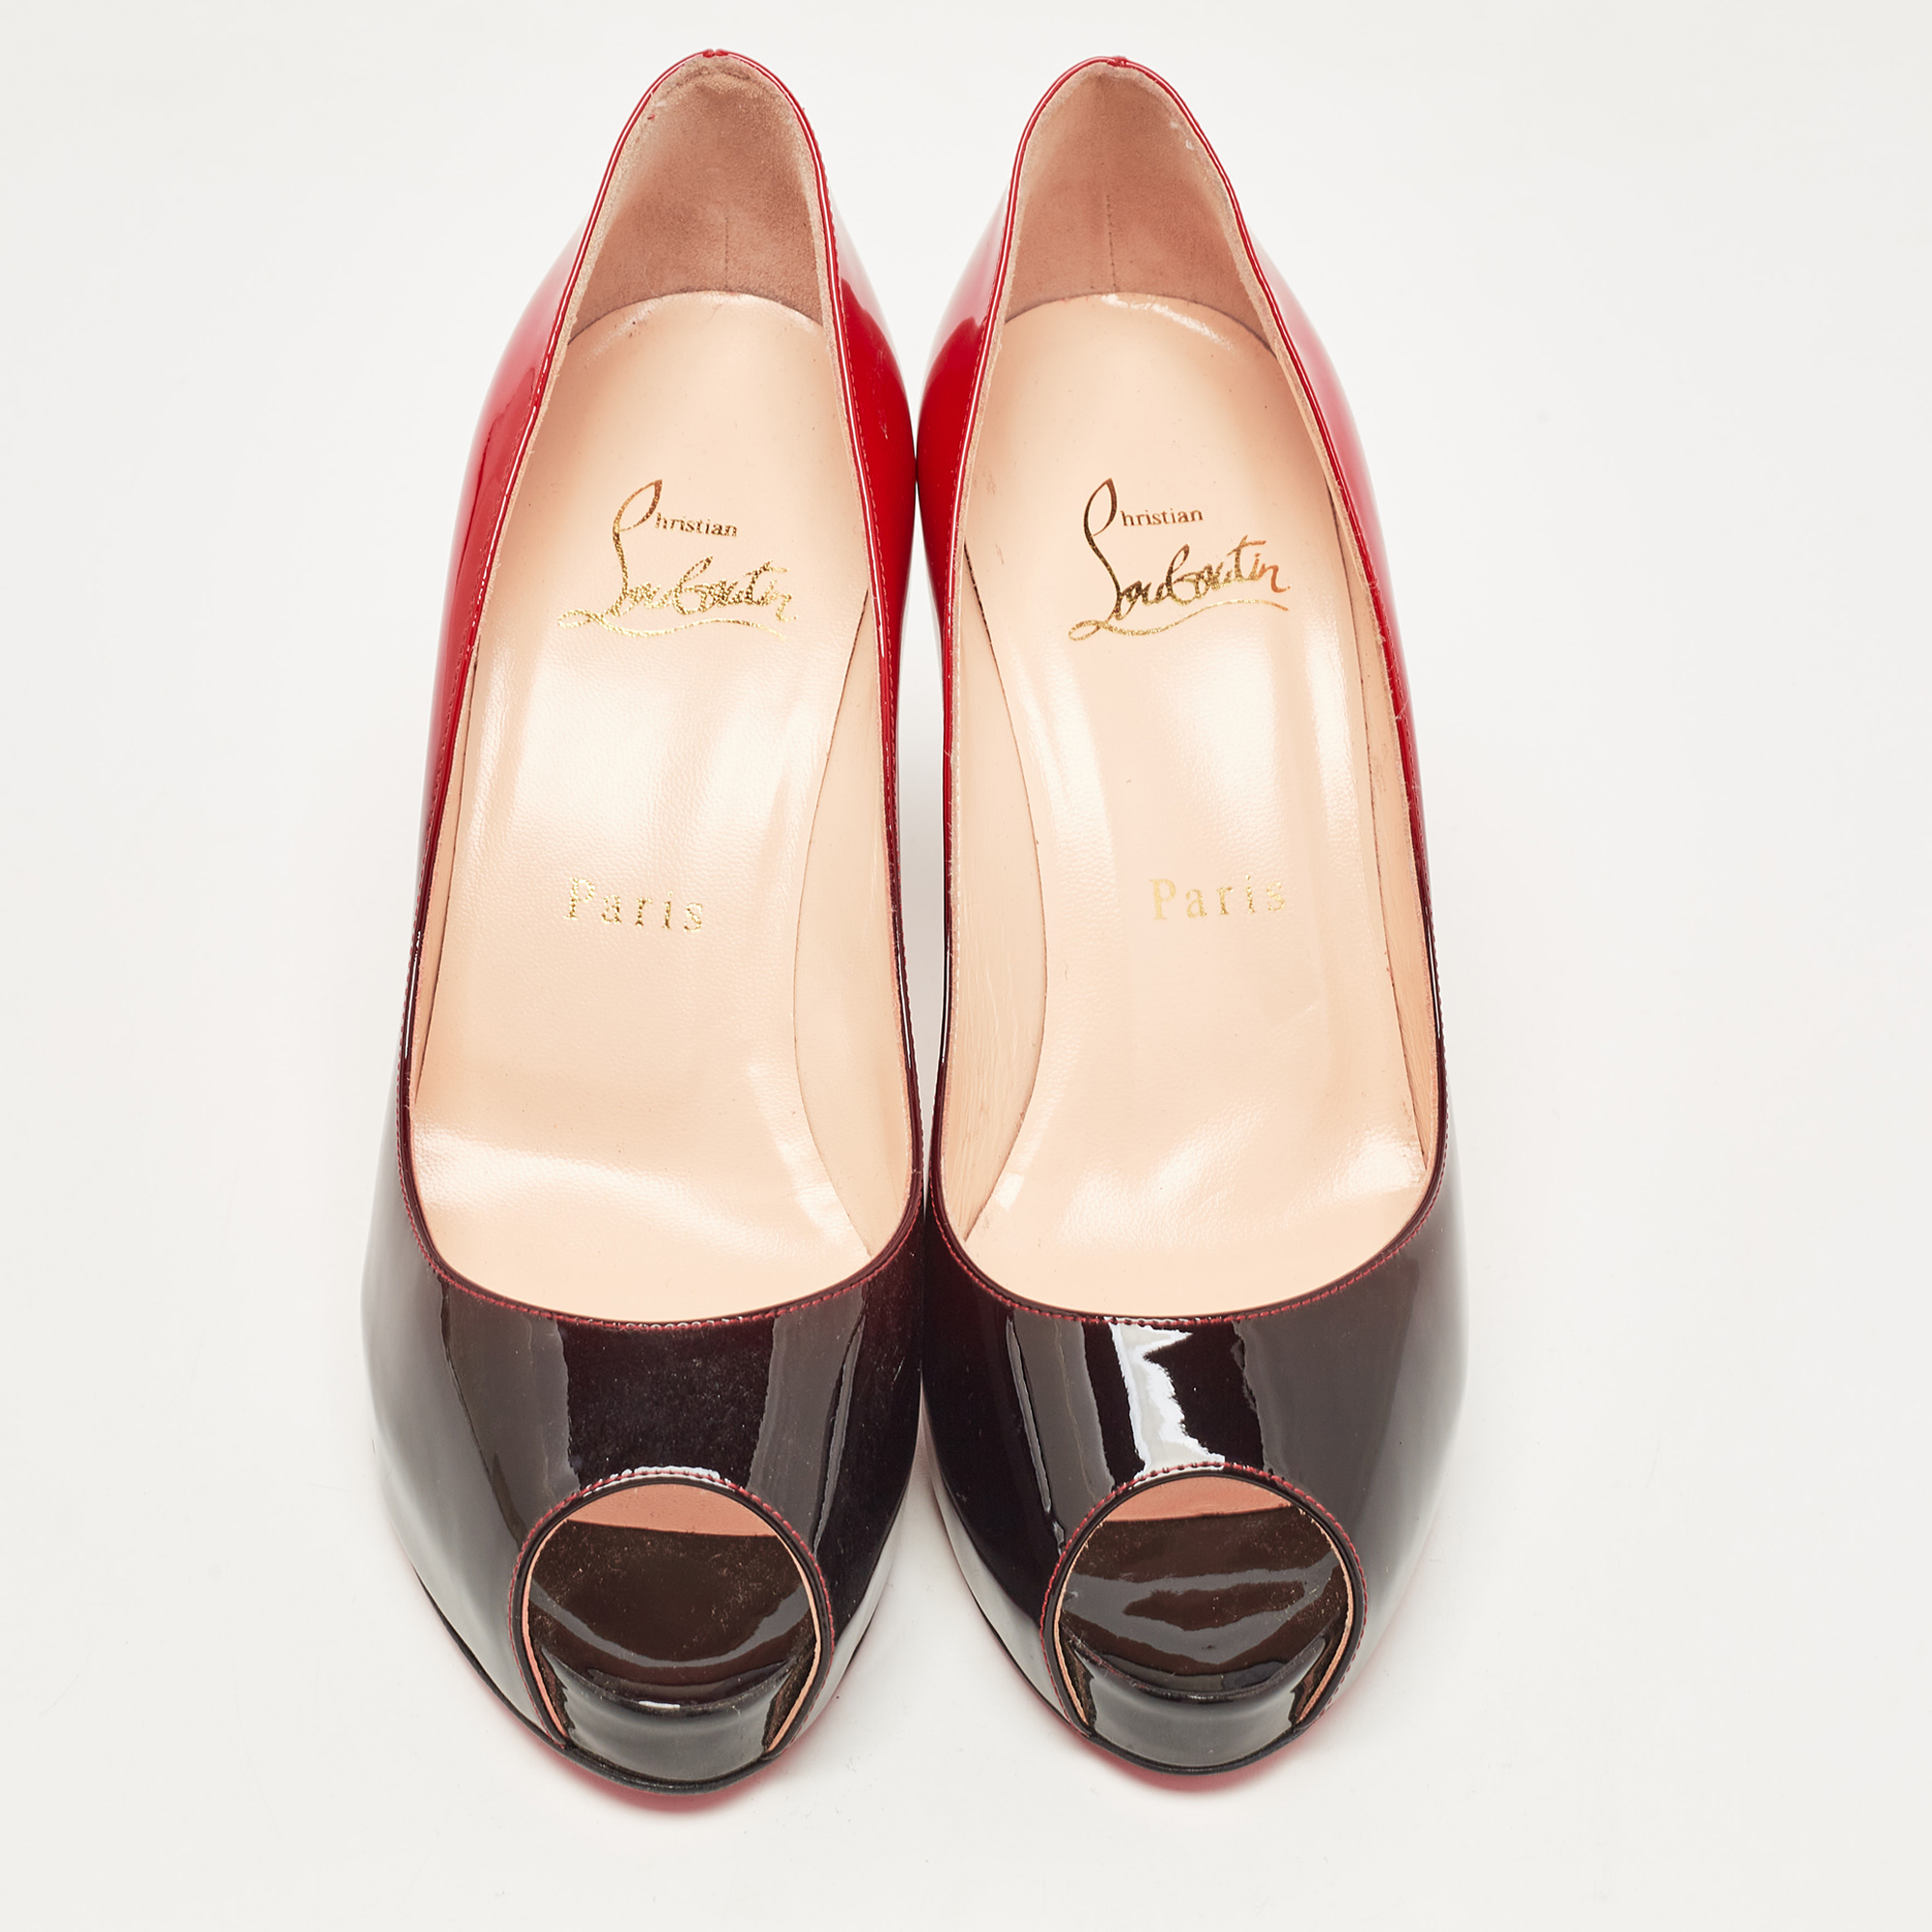 Christian Louboutin Red/Black Patent Very Prive Pumps Size 37